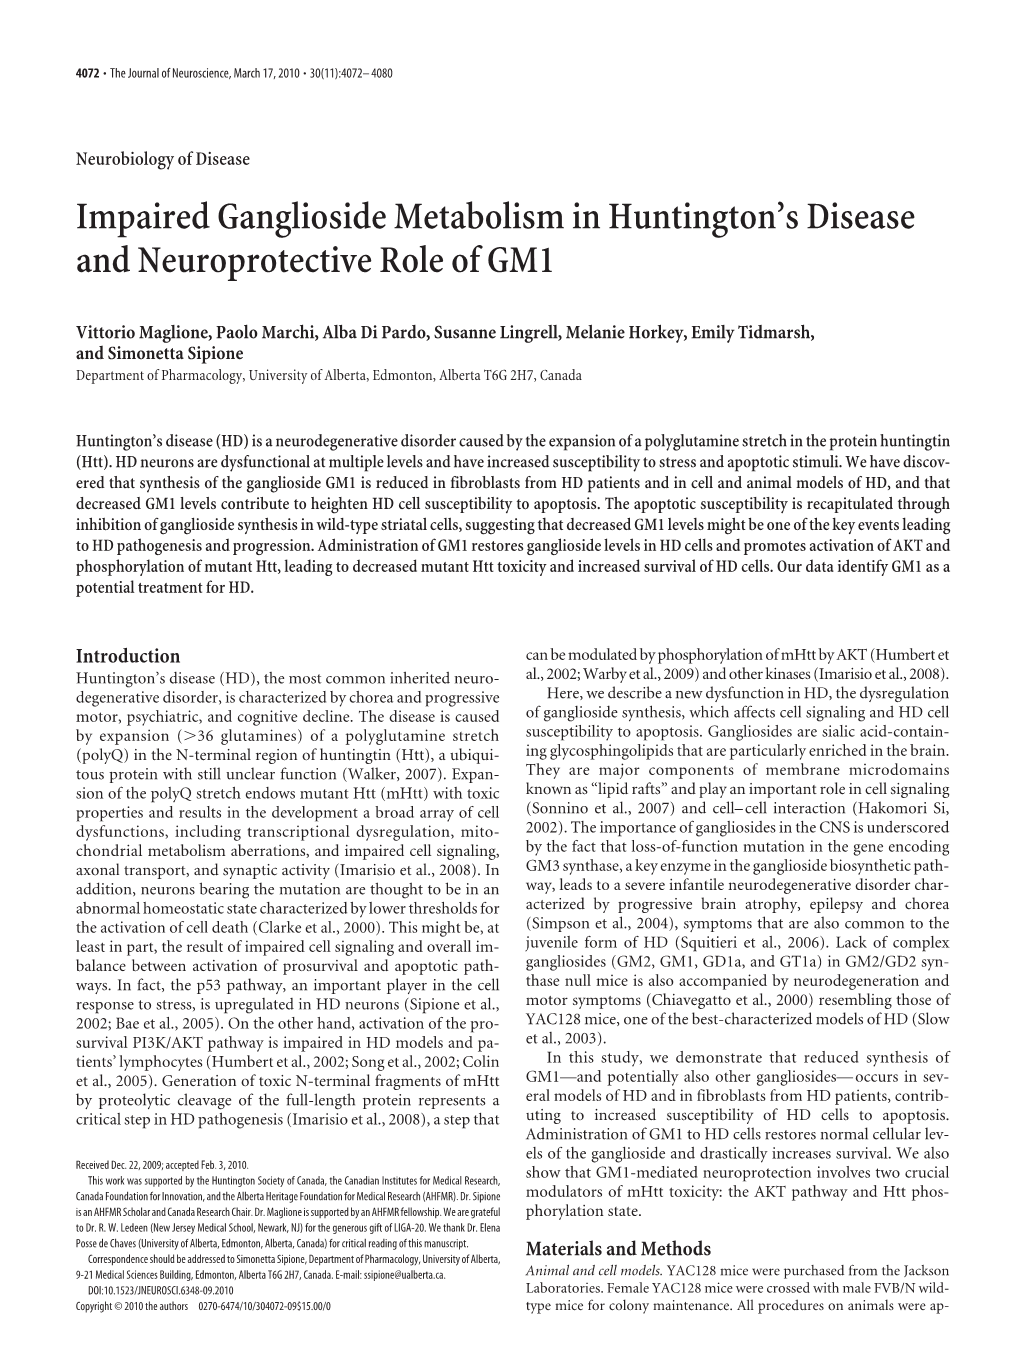 Impaired Ganglioside Metabolism in Huntington's Disease And